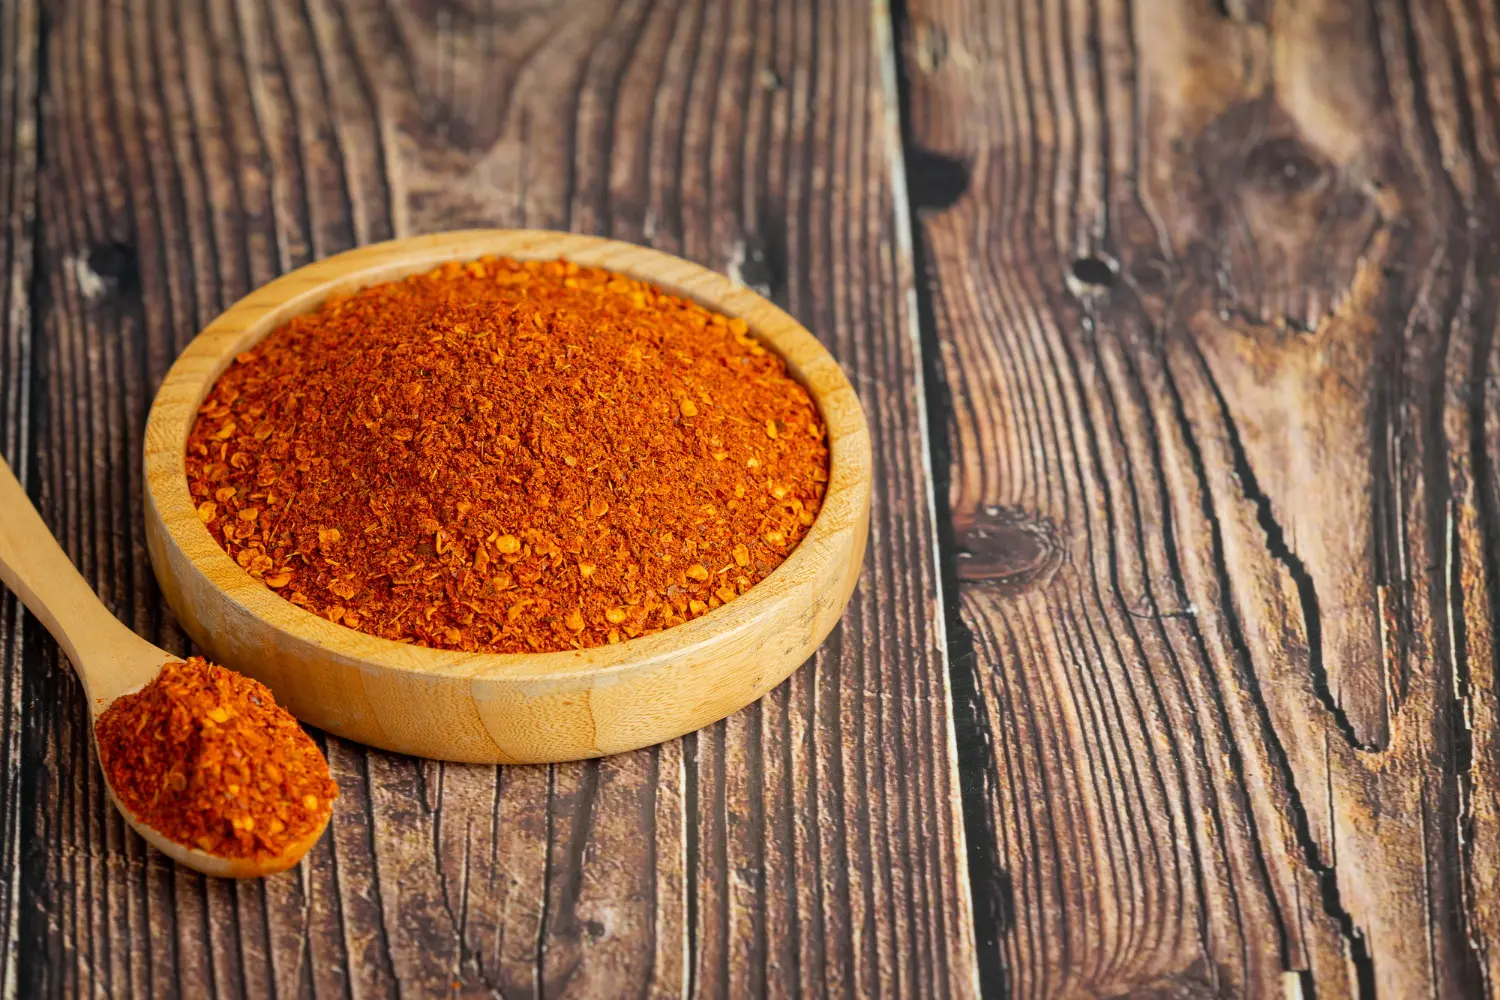 A wooden bowl full of vibrant red chorizo seasoning alongside a spoonful of the spice blend on a rustic wooden table.